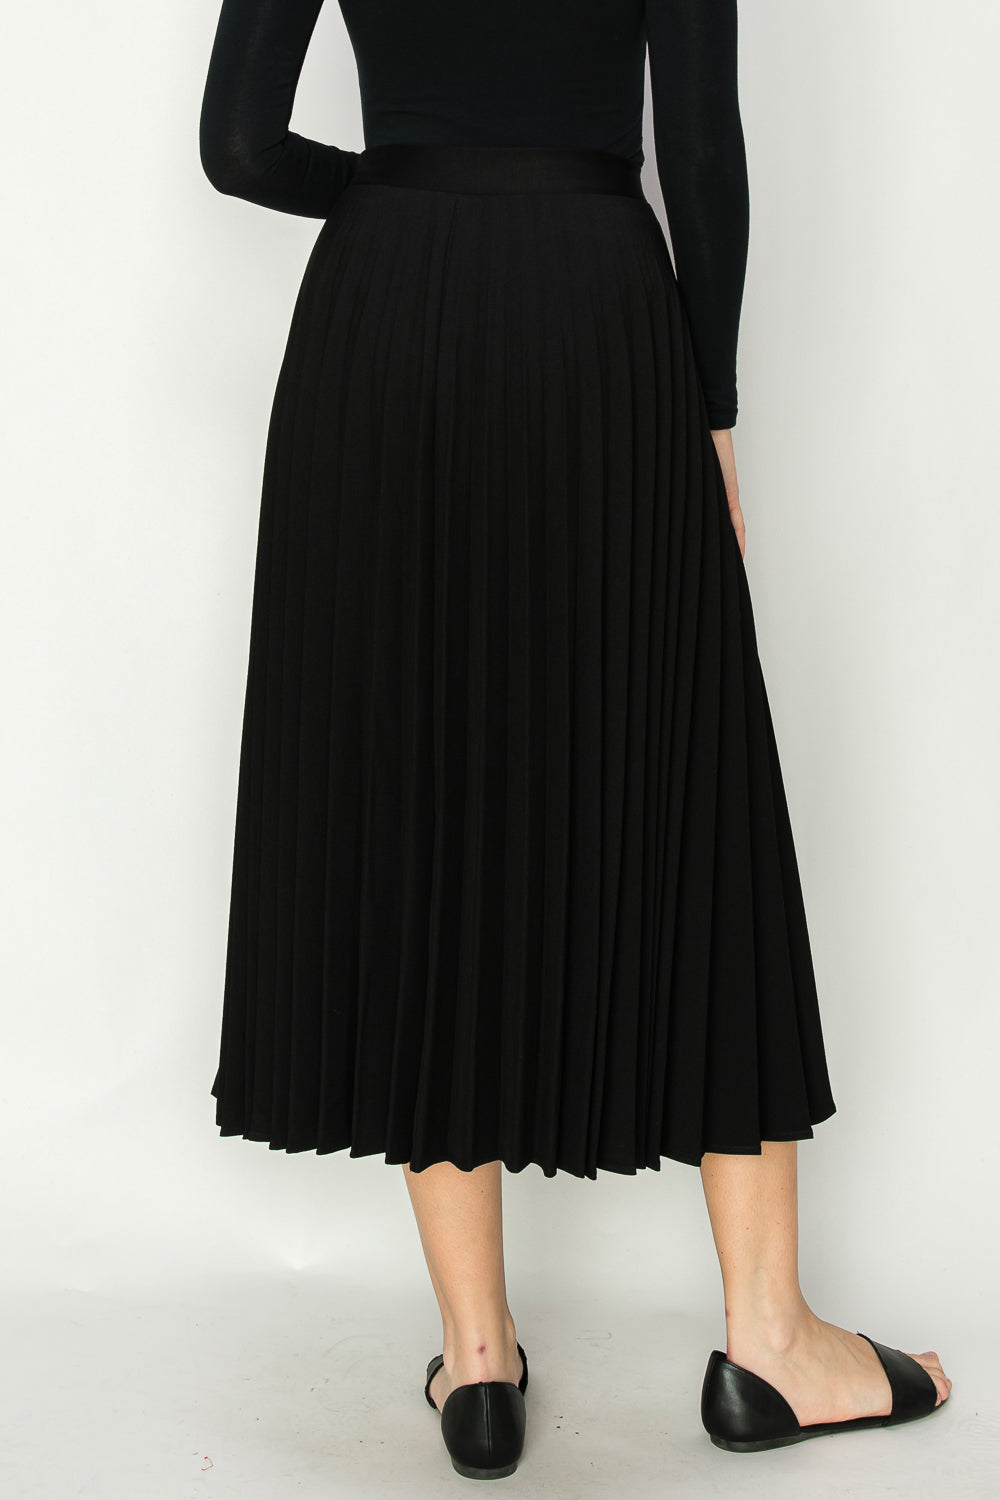 Pleated Skirt with elastic waist available in midi and maxi lengths